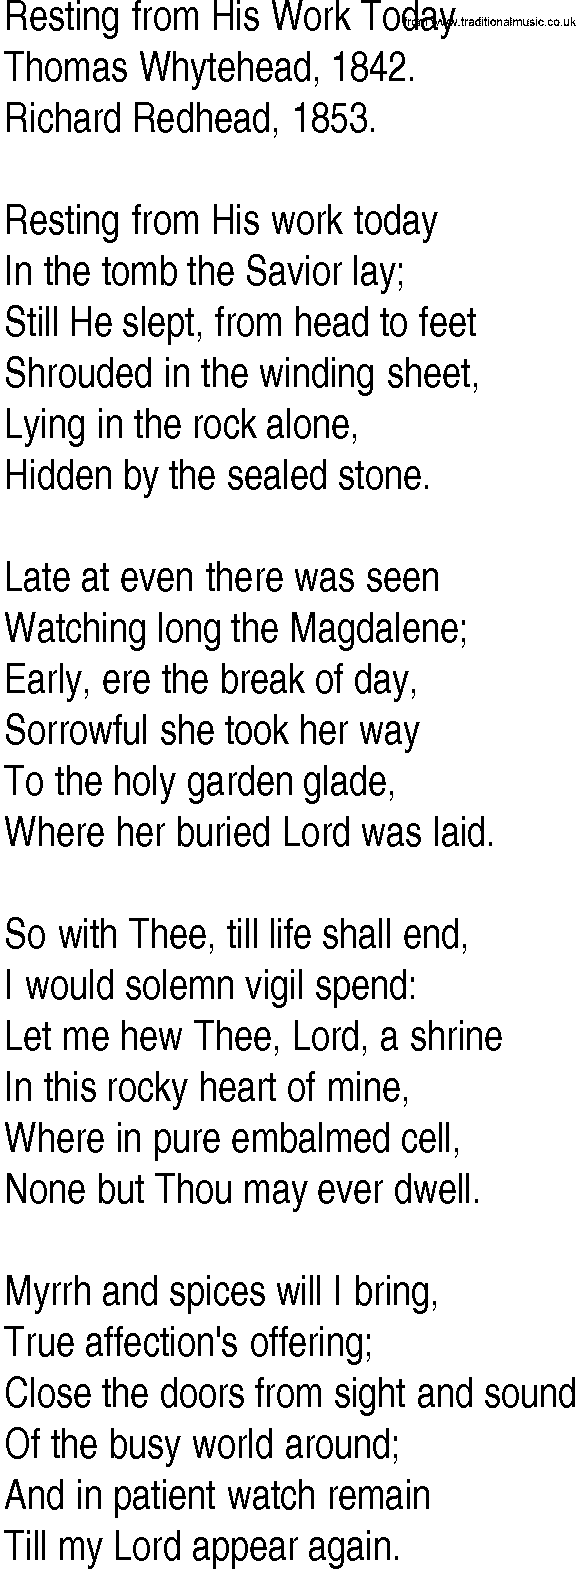 Hymn and Gospel Song: Resting from His Work Today by Thomas Whytehead lyrics